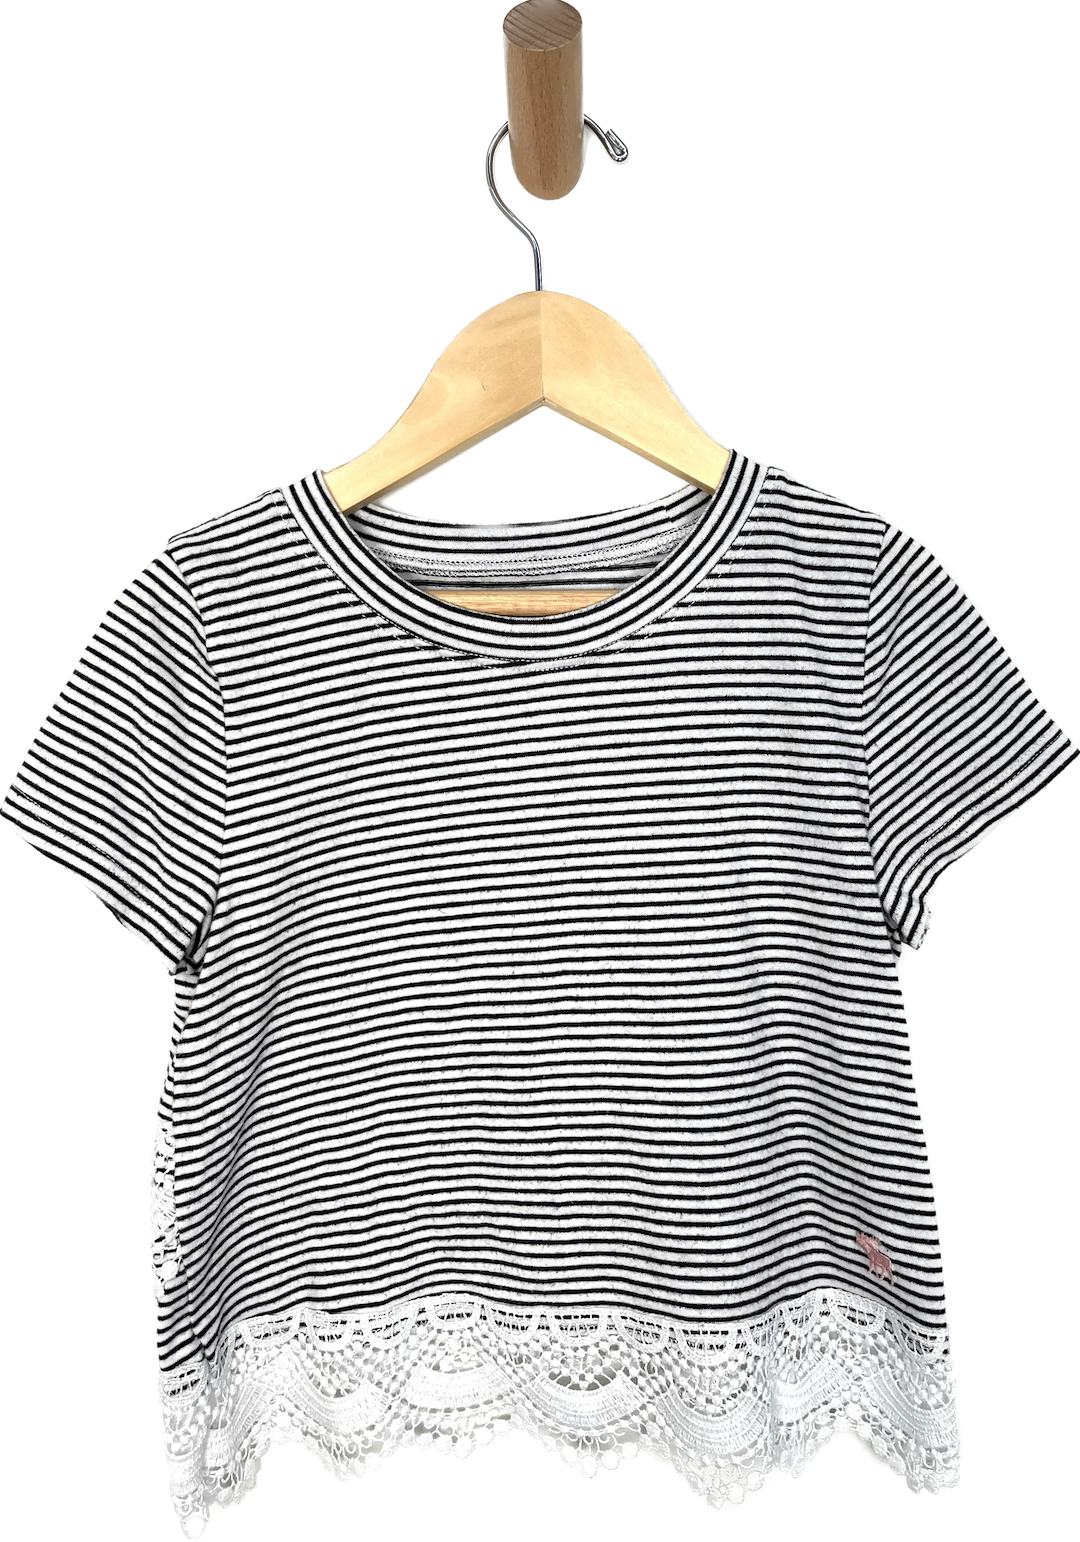 abercrombie black white stripe with lace shirt 5T